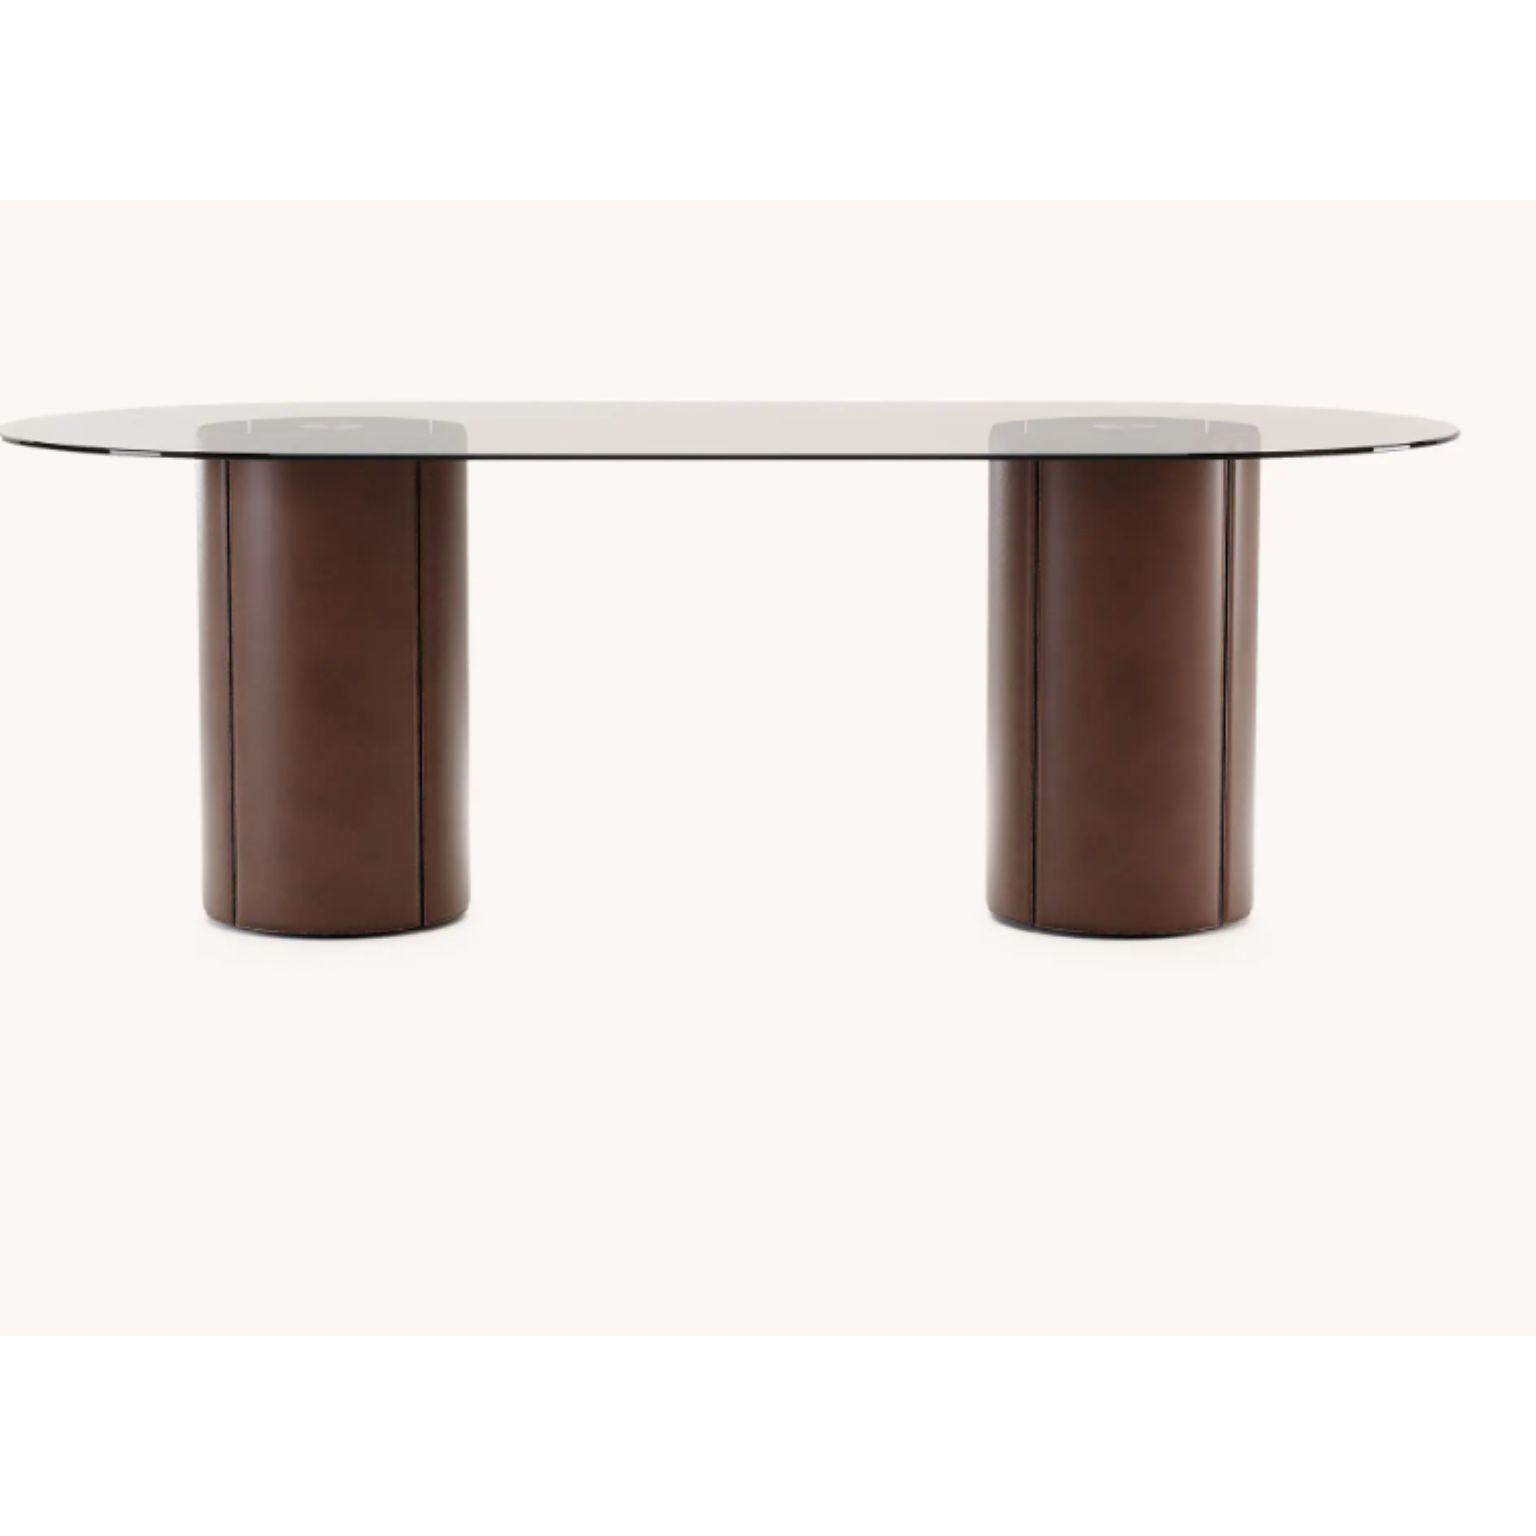 Post-Modern Oval Mano Dining Table by Domkapa For Sale